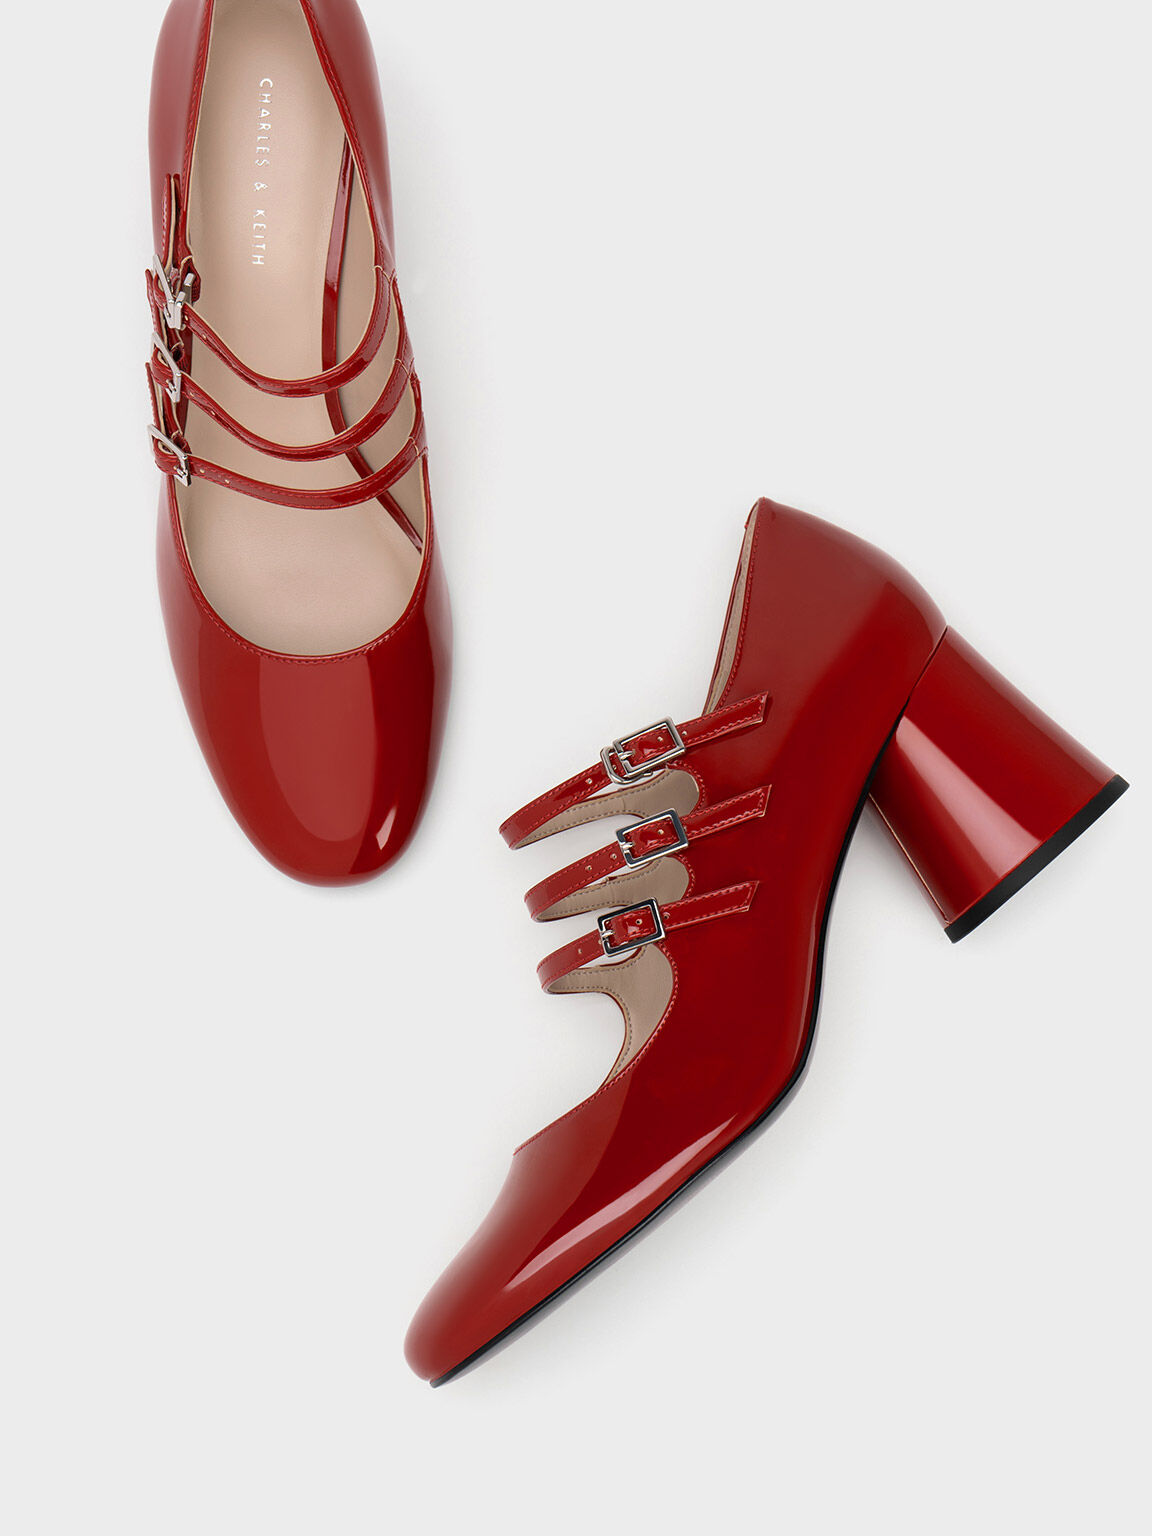 Buckled Cylindrical Heel Mary Janes, Red, hi-res